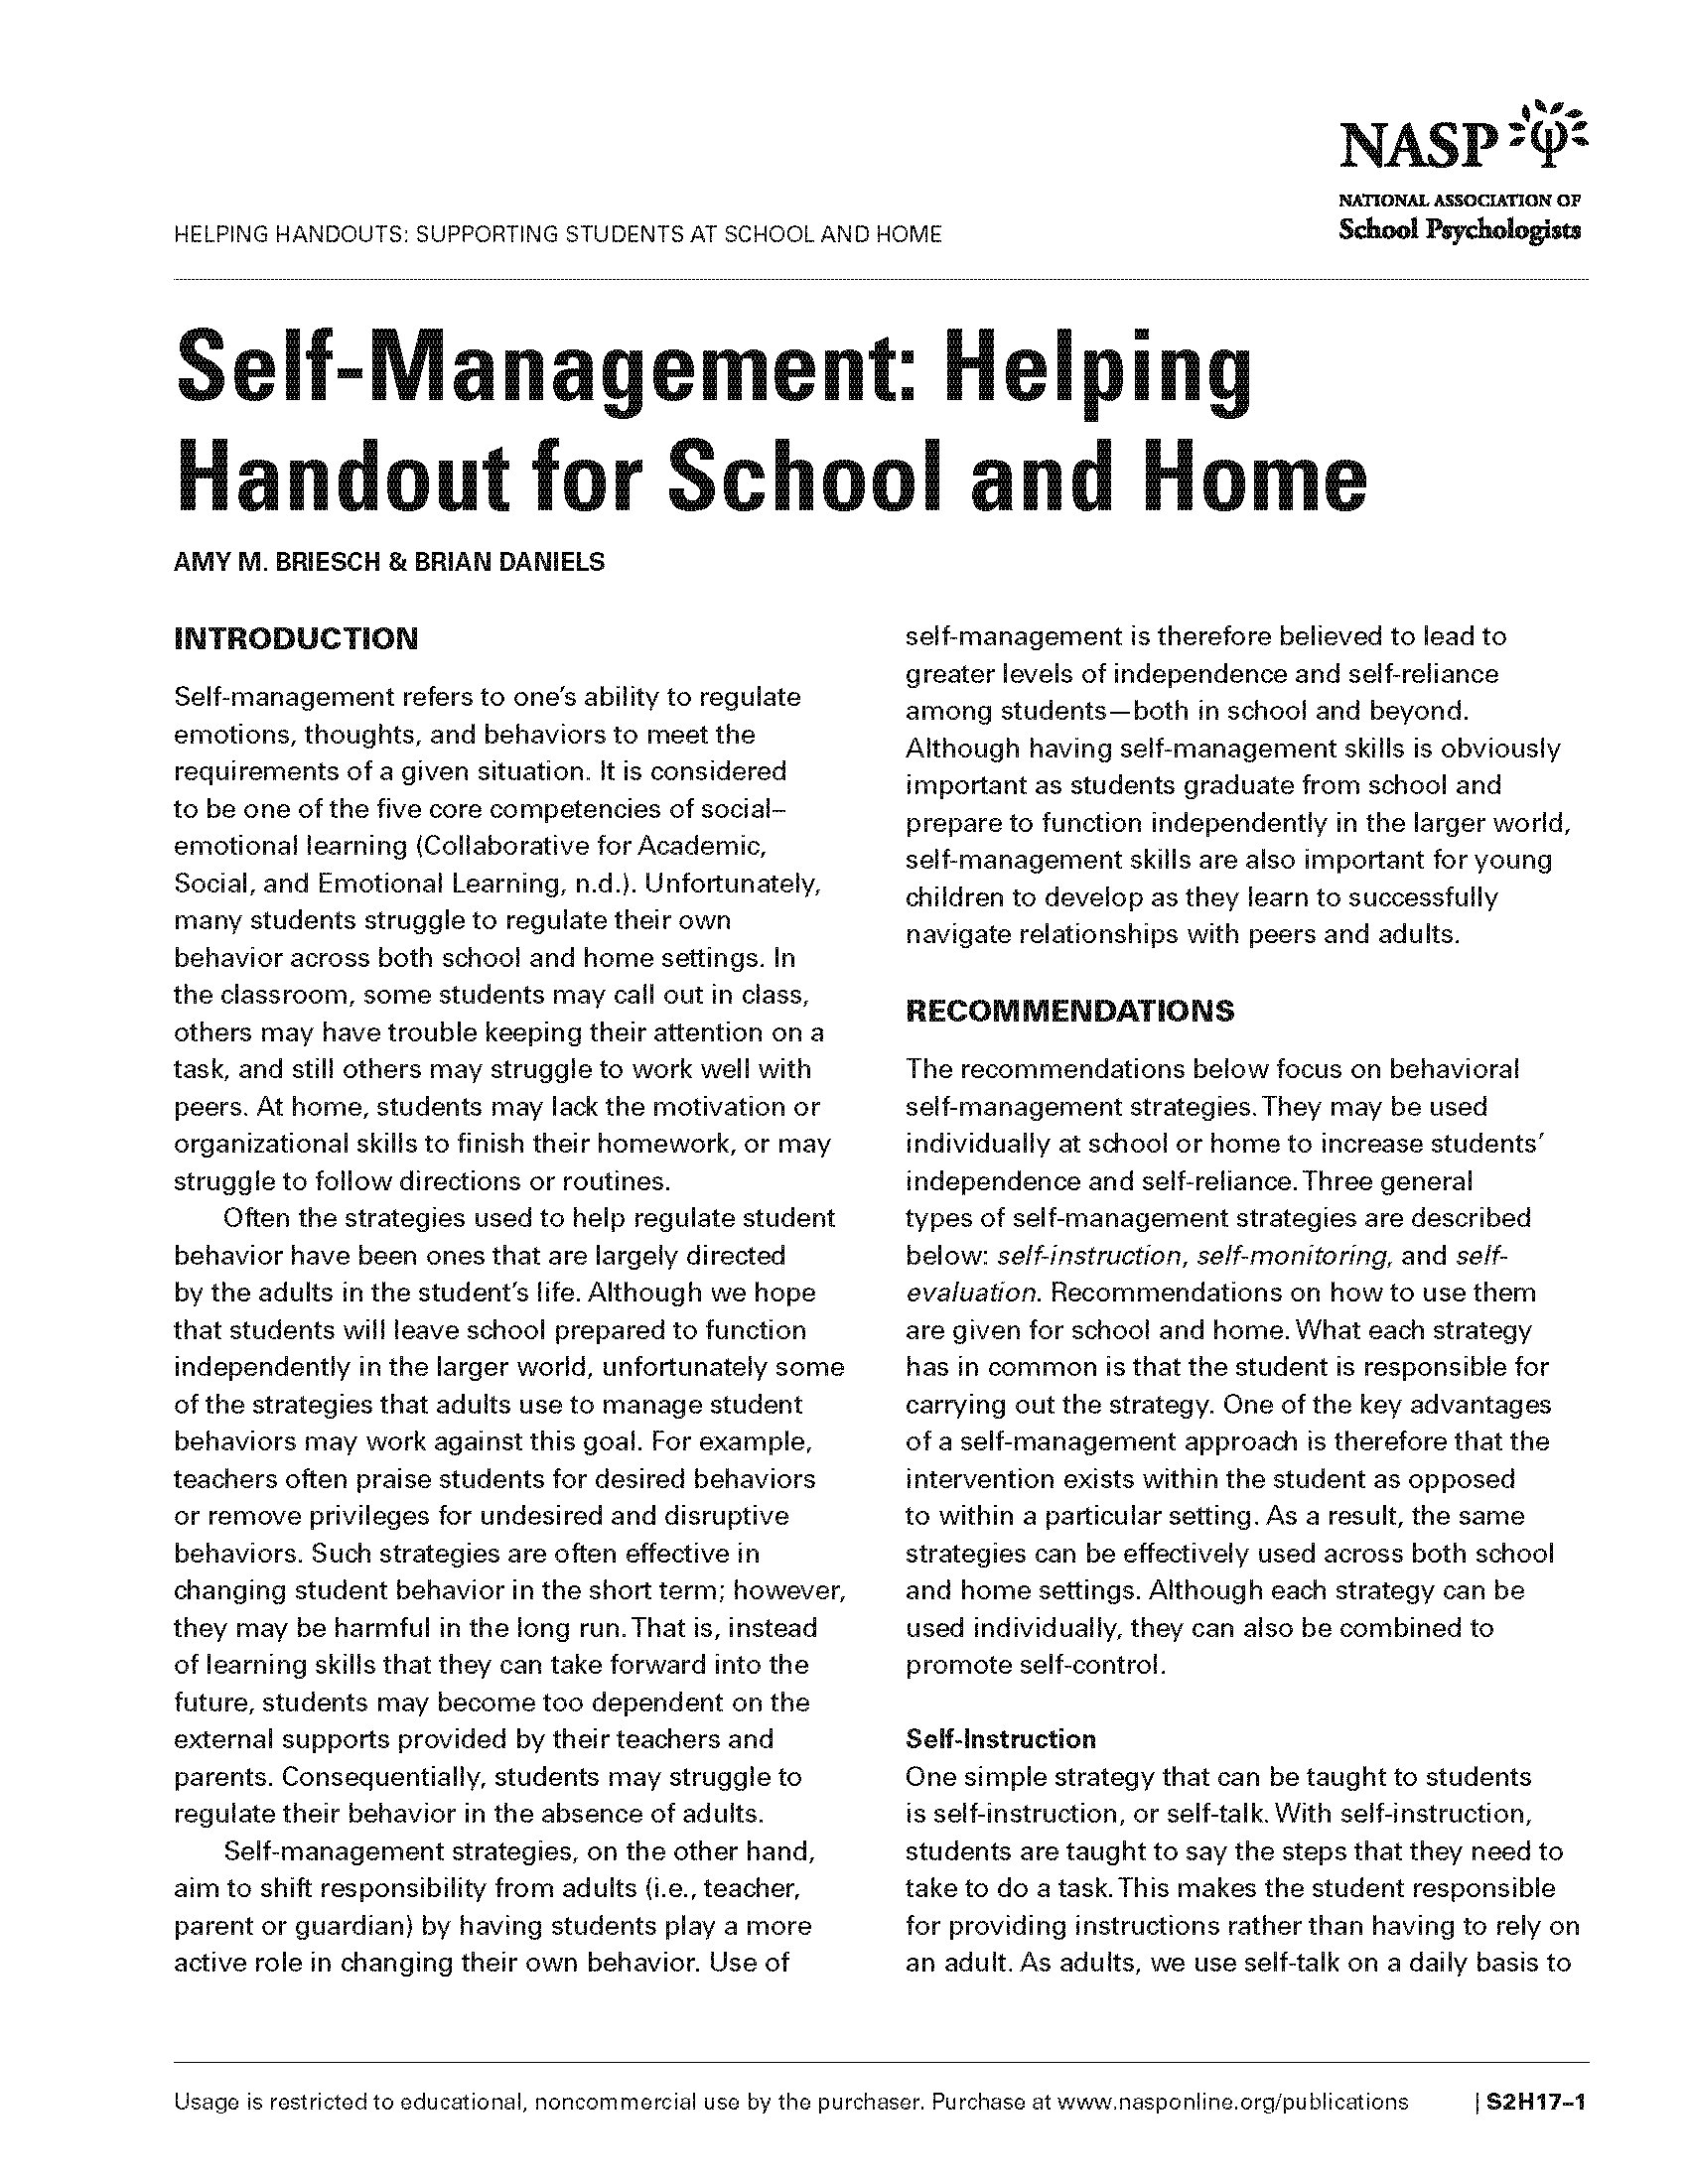 Self-Management: Helping Handout for School and Home